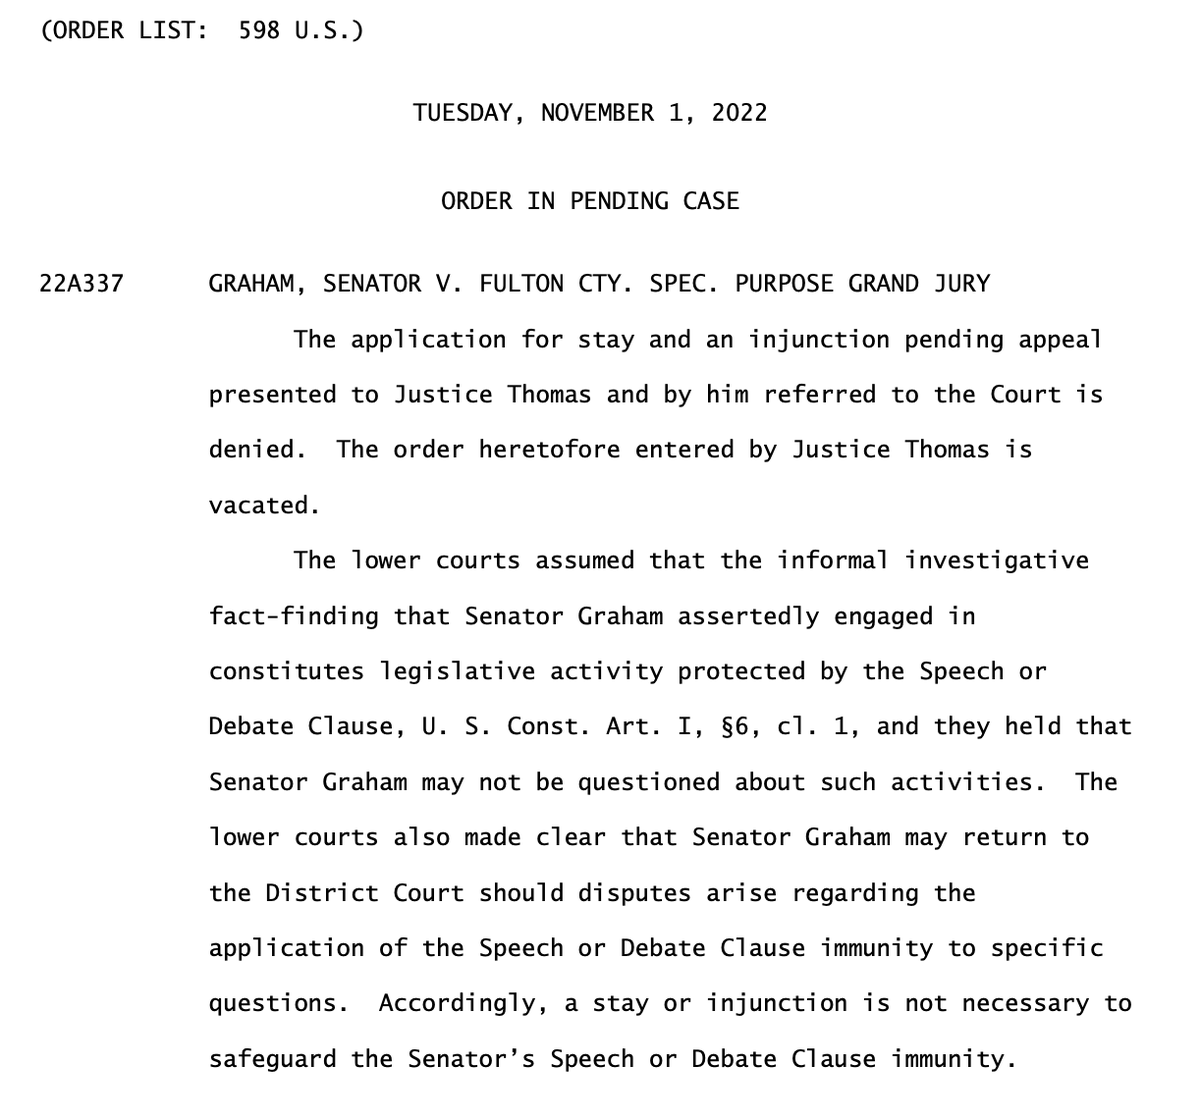 BREAKING: The Supreme Court DENIES Lindsey Graham's bid to avoid testifying before a Georgia grand jury as part of the grand jury's investigation into election interference in that state. There are no recorded dissents. supremecourt.gov/orders/courtor…